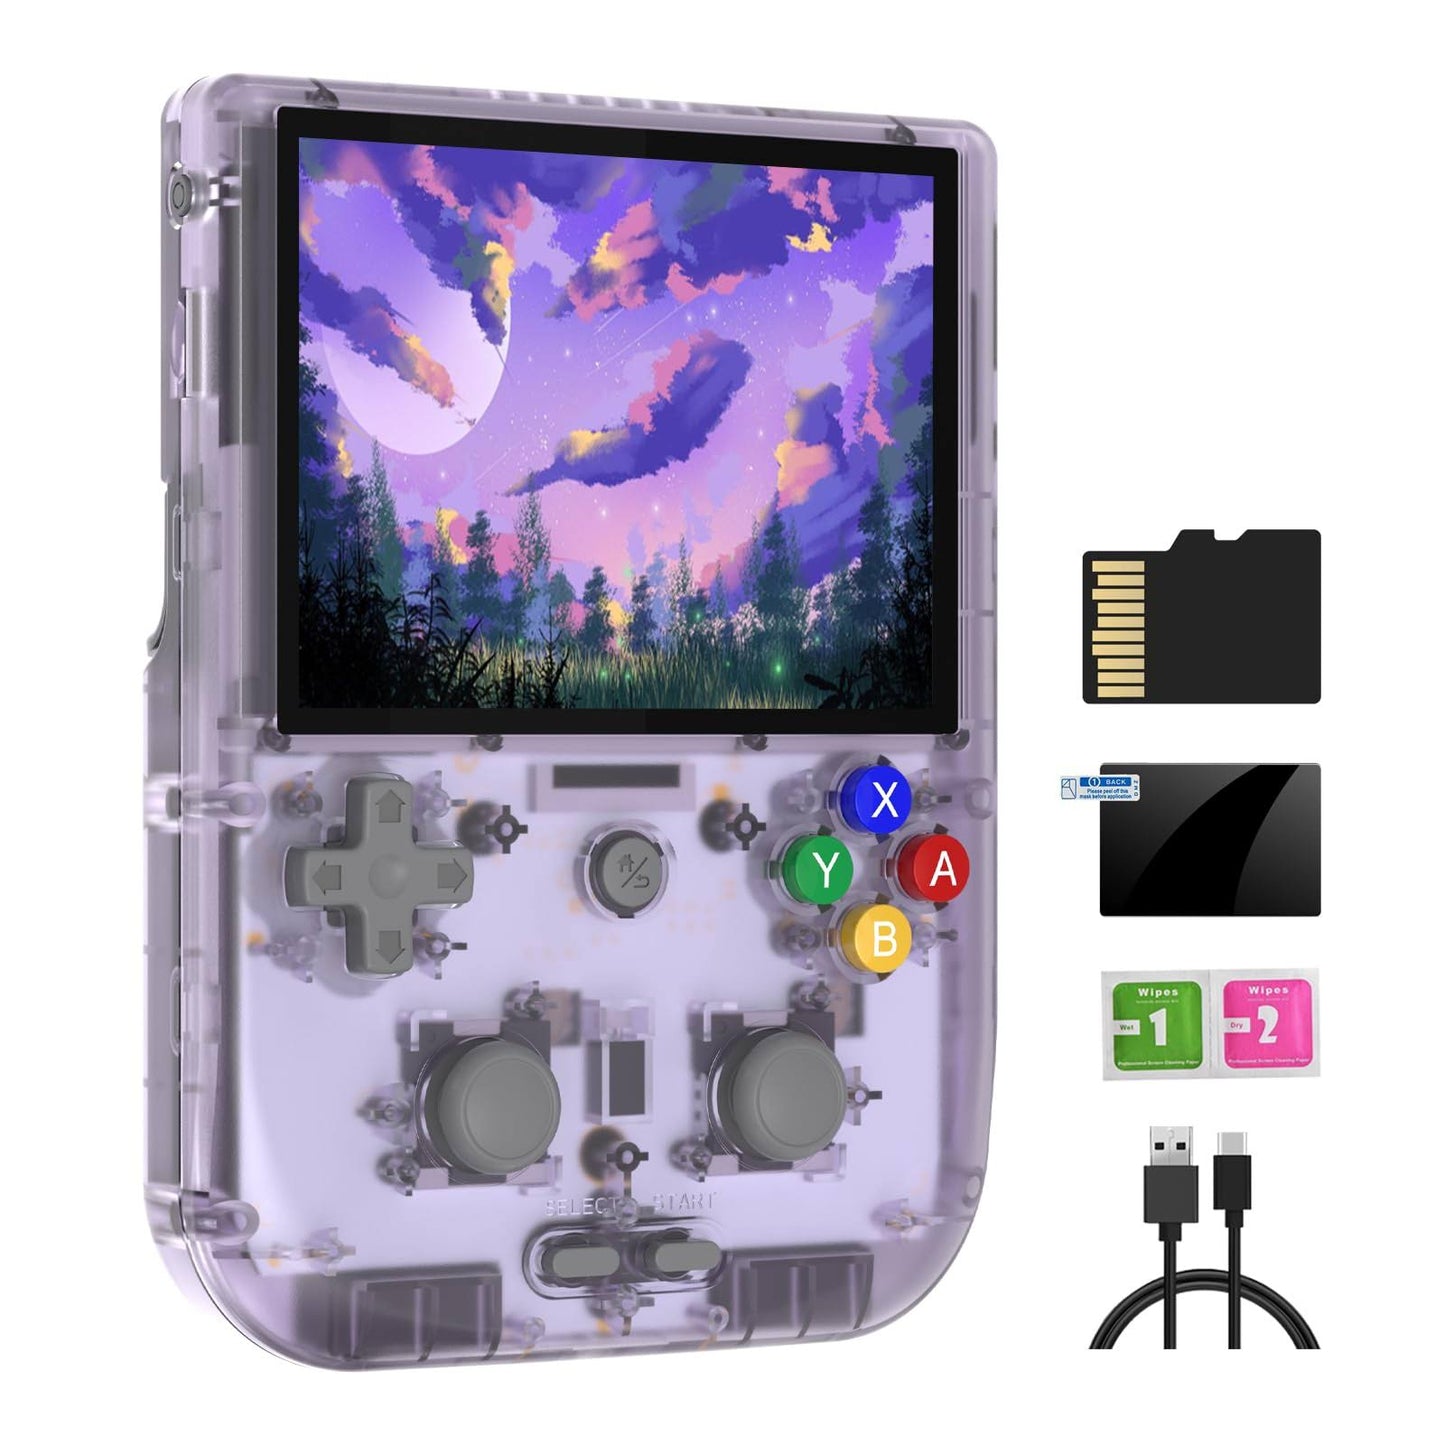 Retro Video Handheld Game Console Android 12 System 4ips Touch Screen Game Player Built-In 128g Tf Card 3154 Classic Games 5500 Mah